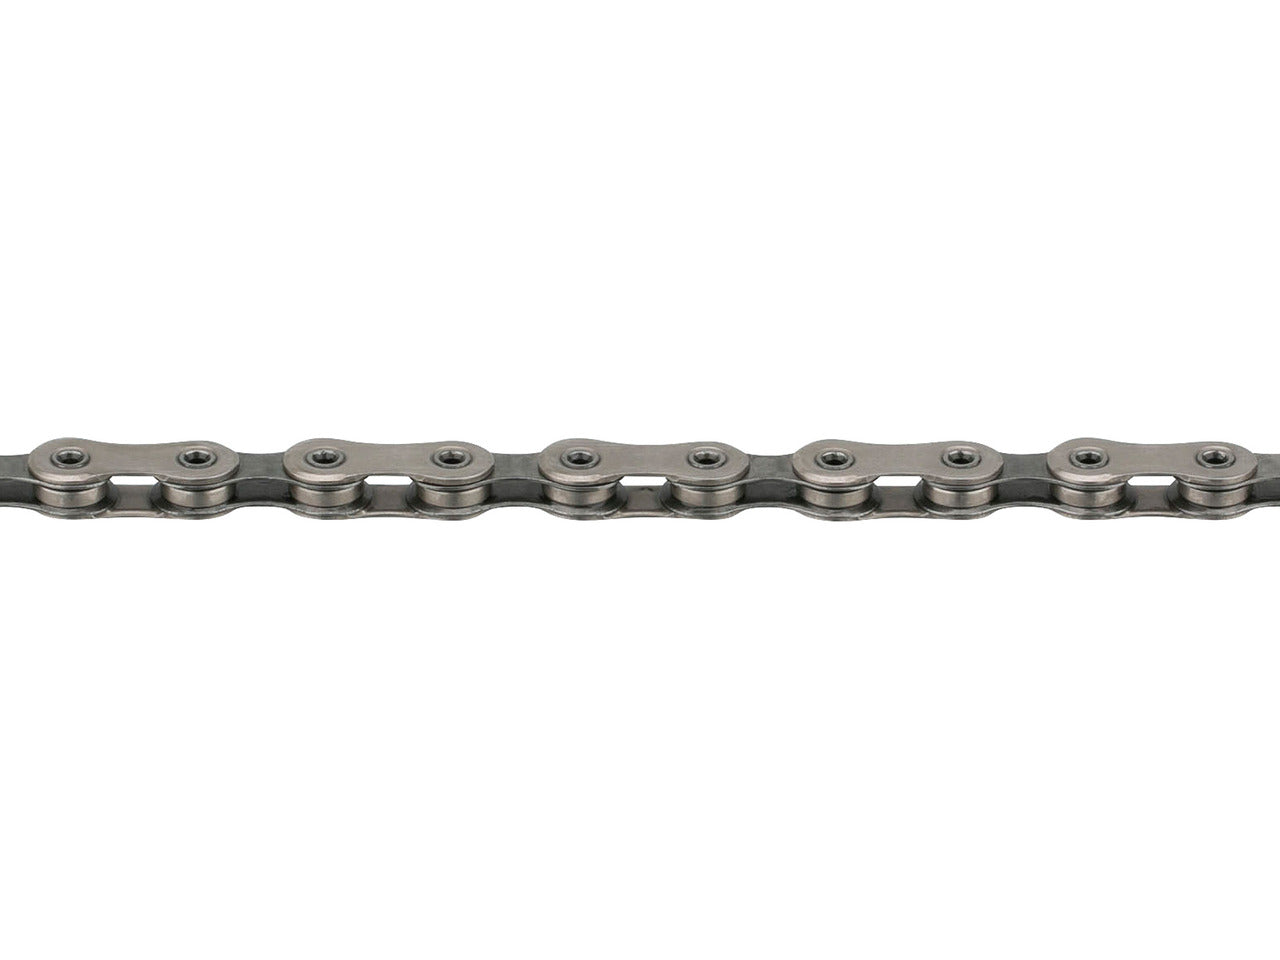 Shimano XTR / Dura-Ace Quick-Link CN-M9100 12-speed Chain - Cyclop.in